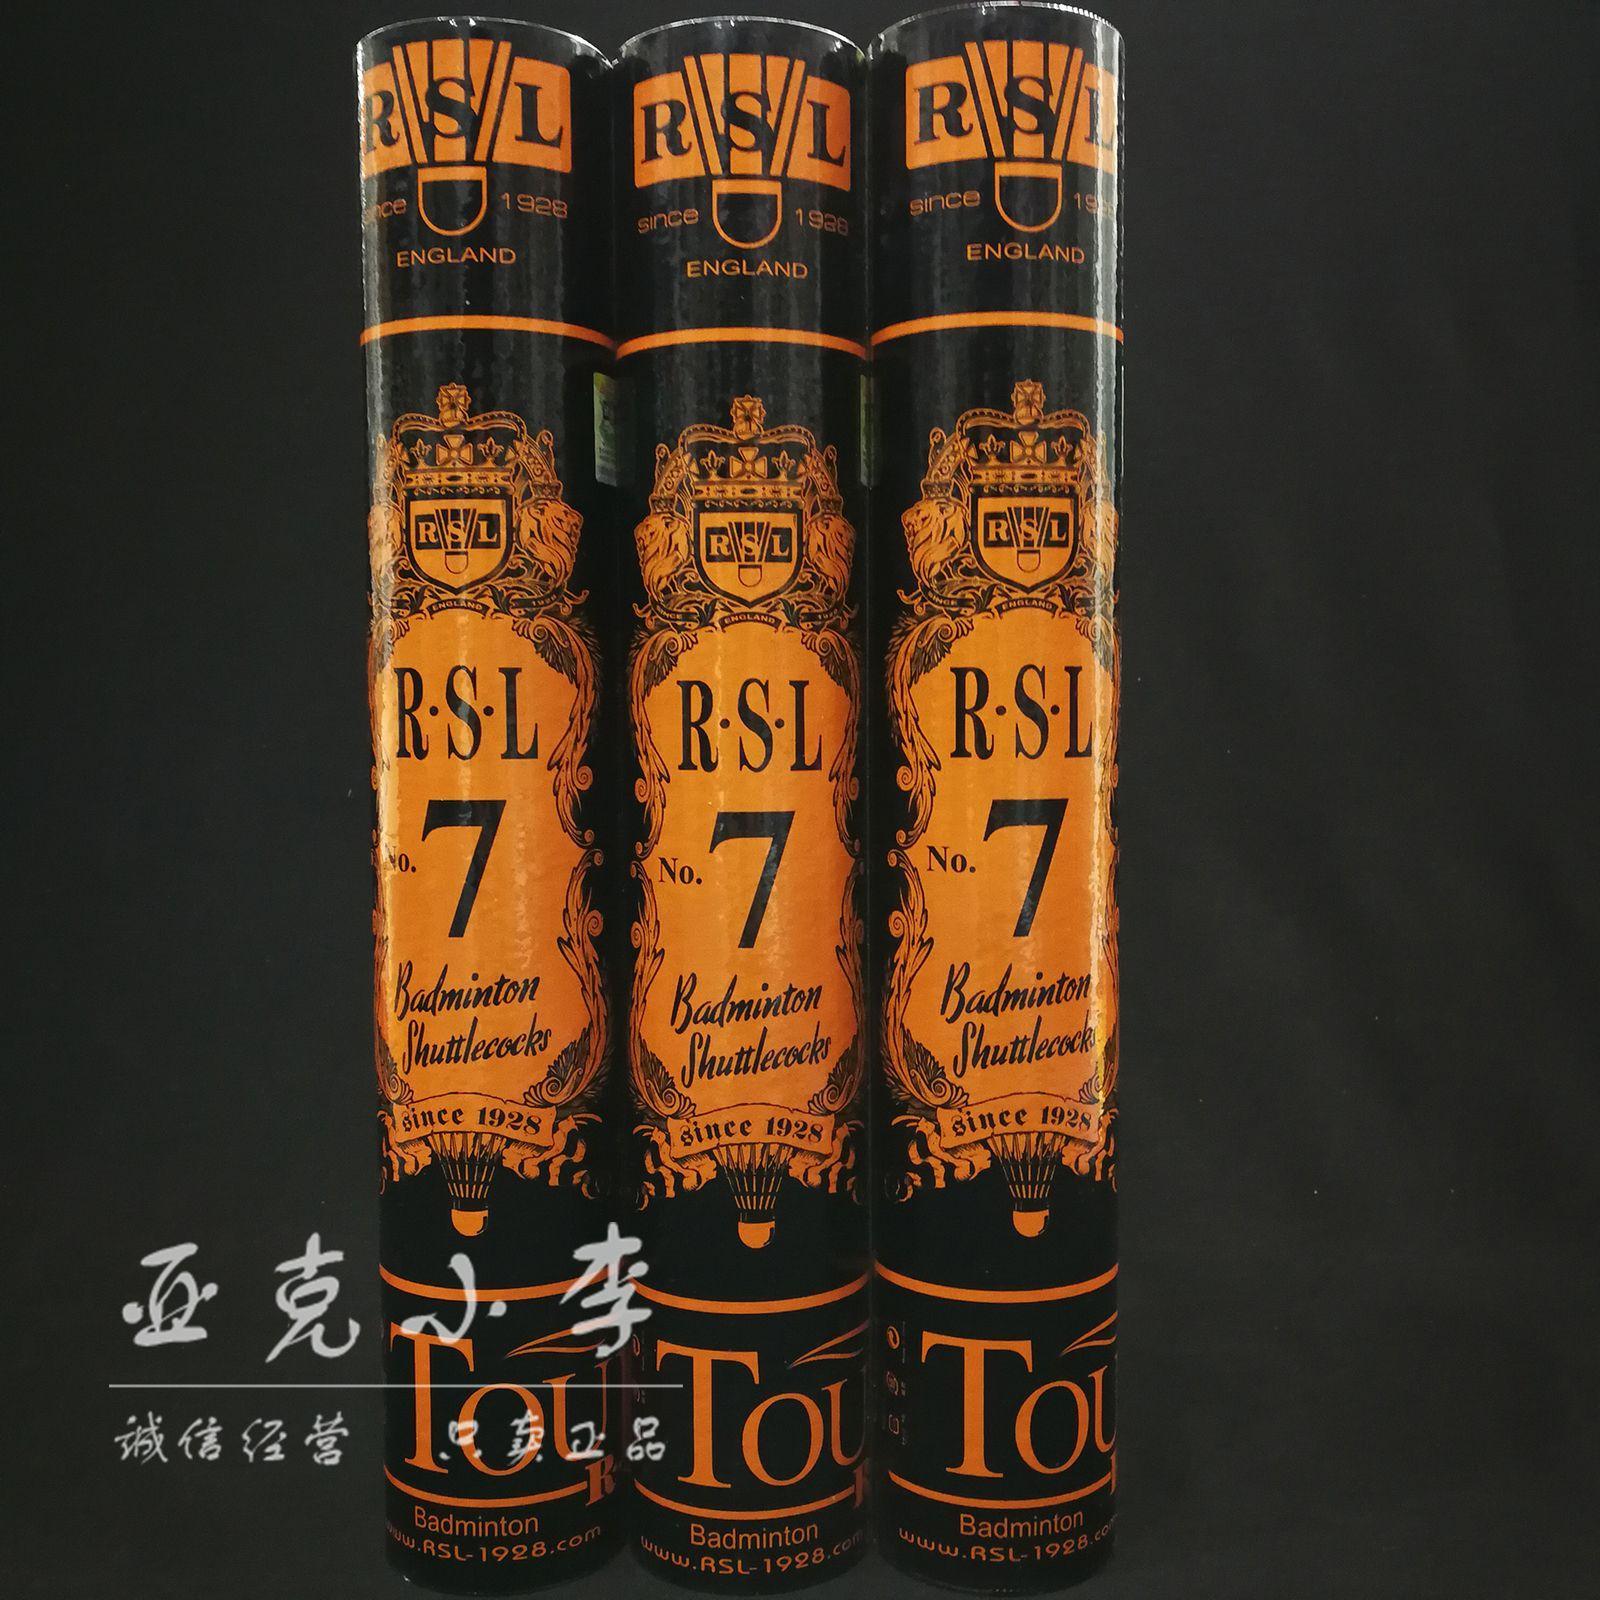 RSL Lion Logo - Only Sell Genuine RSL Asian Lion Dragon Rsl7 NO 7 Badminton With Anti Counterfeiting High Cost Effective